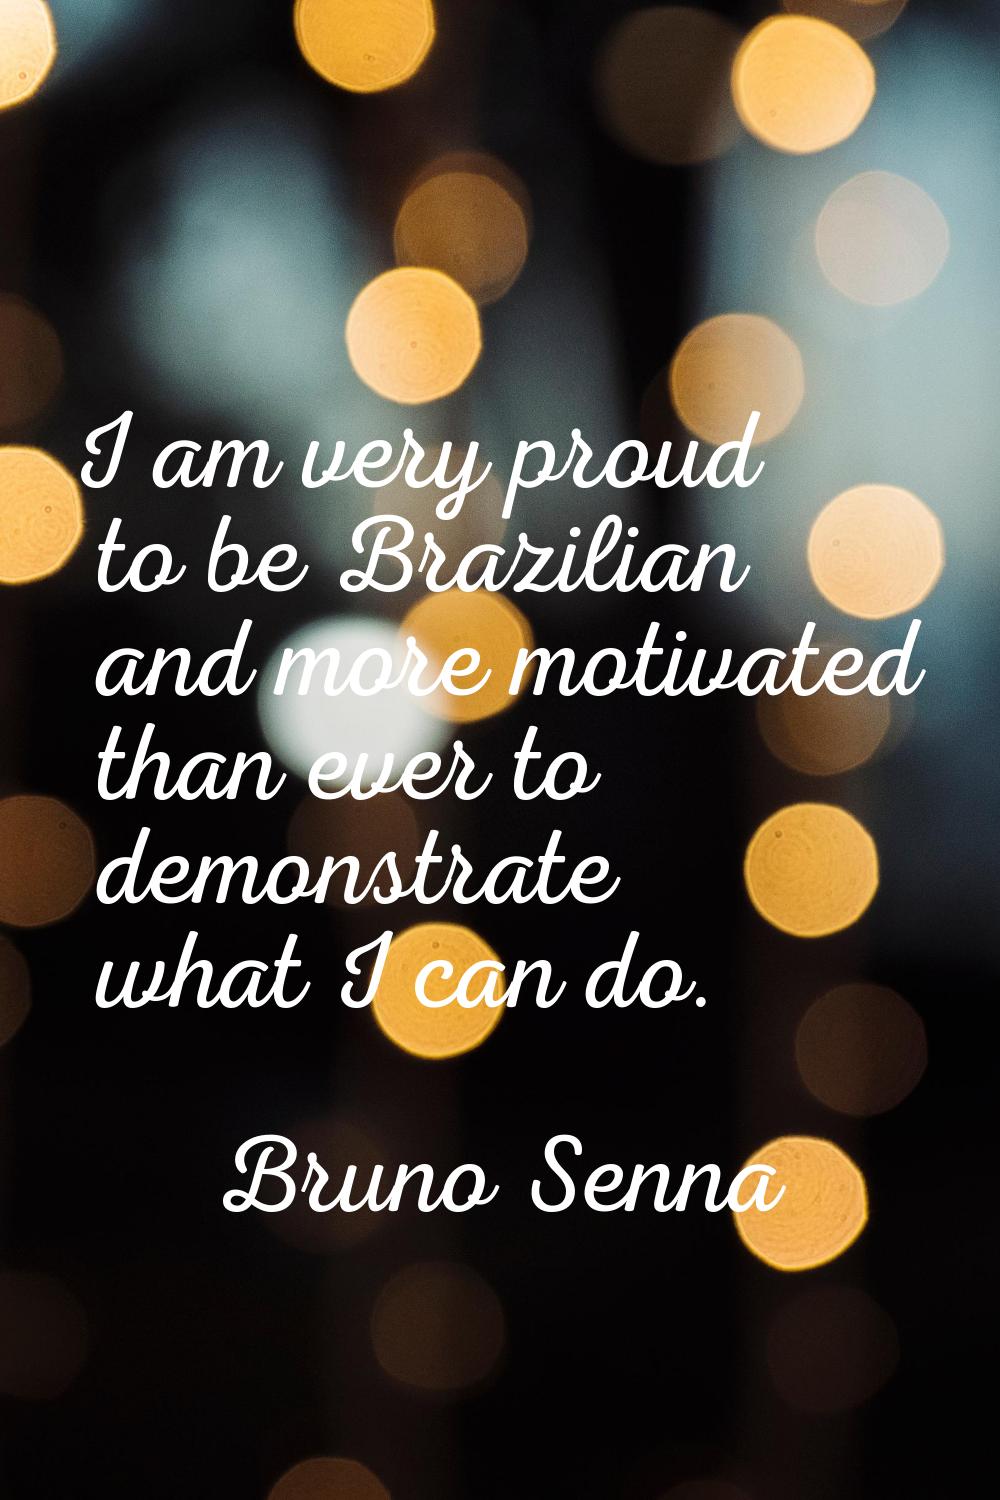 I am very proud to be Brazilian and more motivated than ever to demonstrate what I can do.